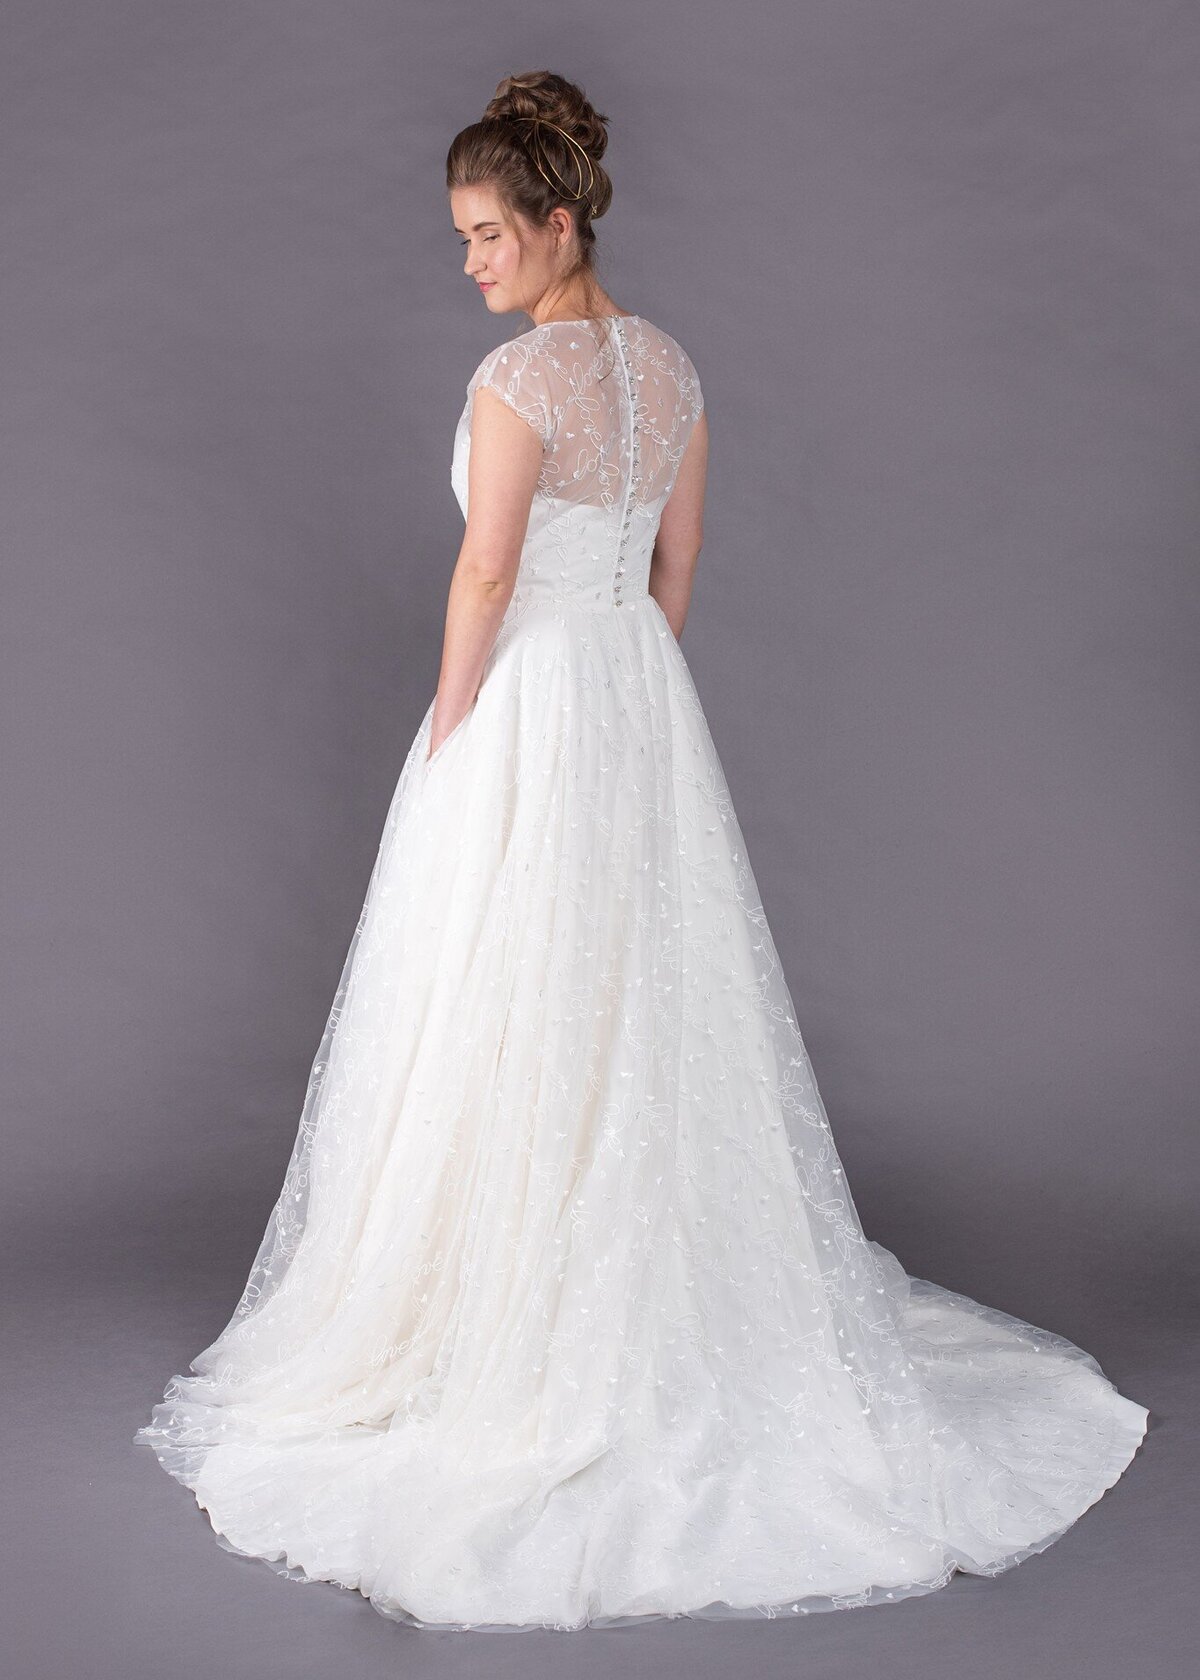 The Norma Jean wedding dress style is a combination of a high illusion neckline and a full a-line skirt with pockets.